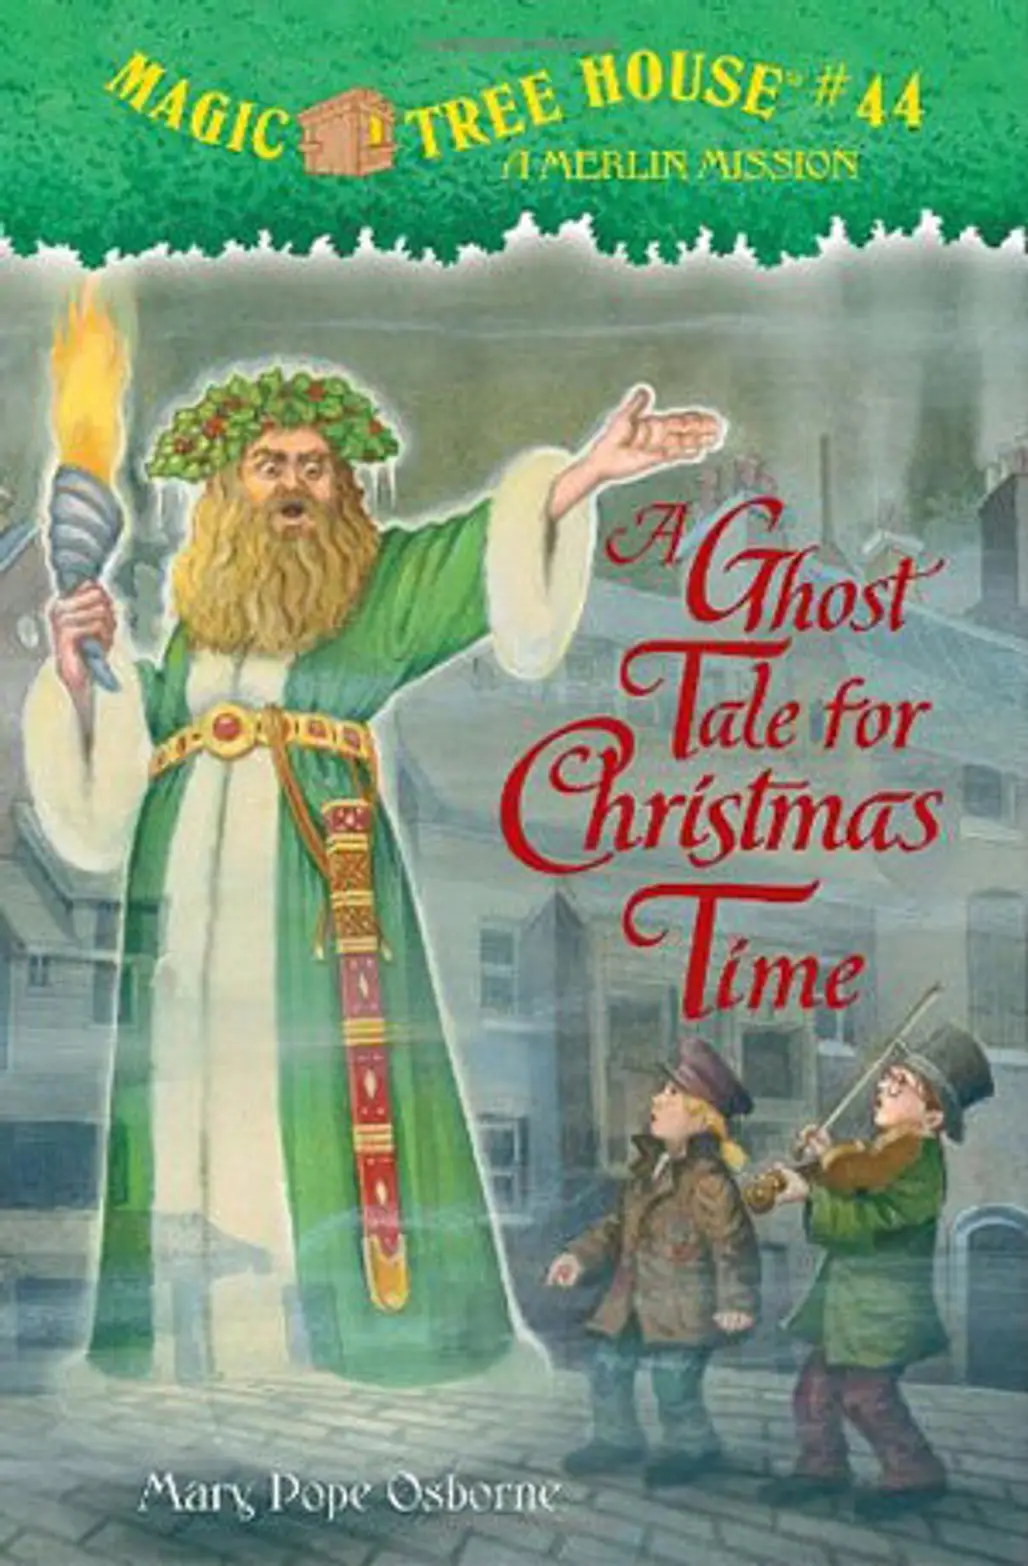 “Magic Tree House #44: a Ghost Tale for Christmas Time” by Mary Pope Osborne